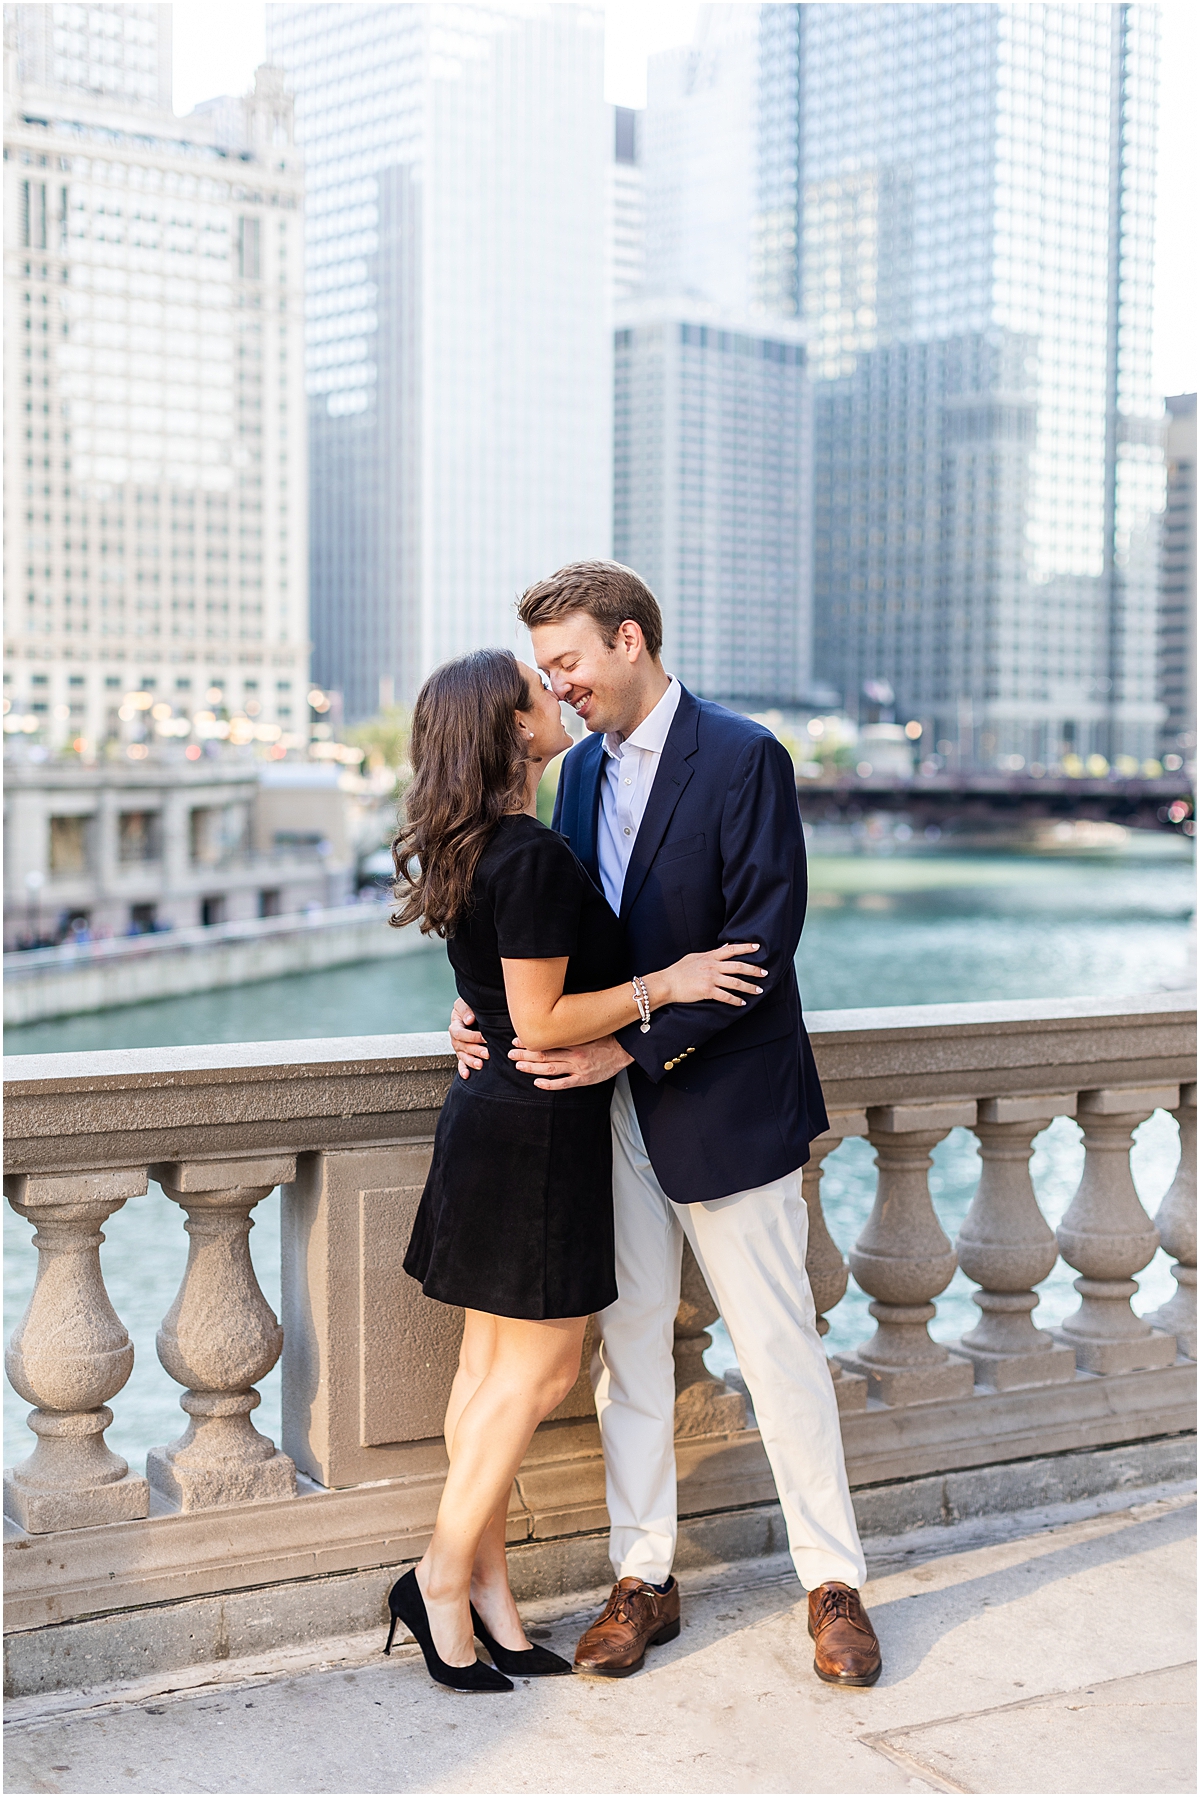 12 Best Chicago Engagement Session Locations with views of the city skyline